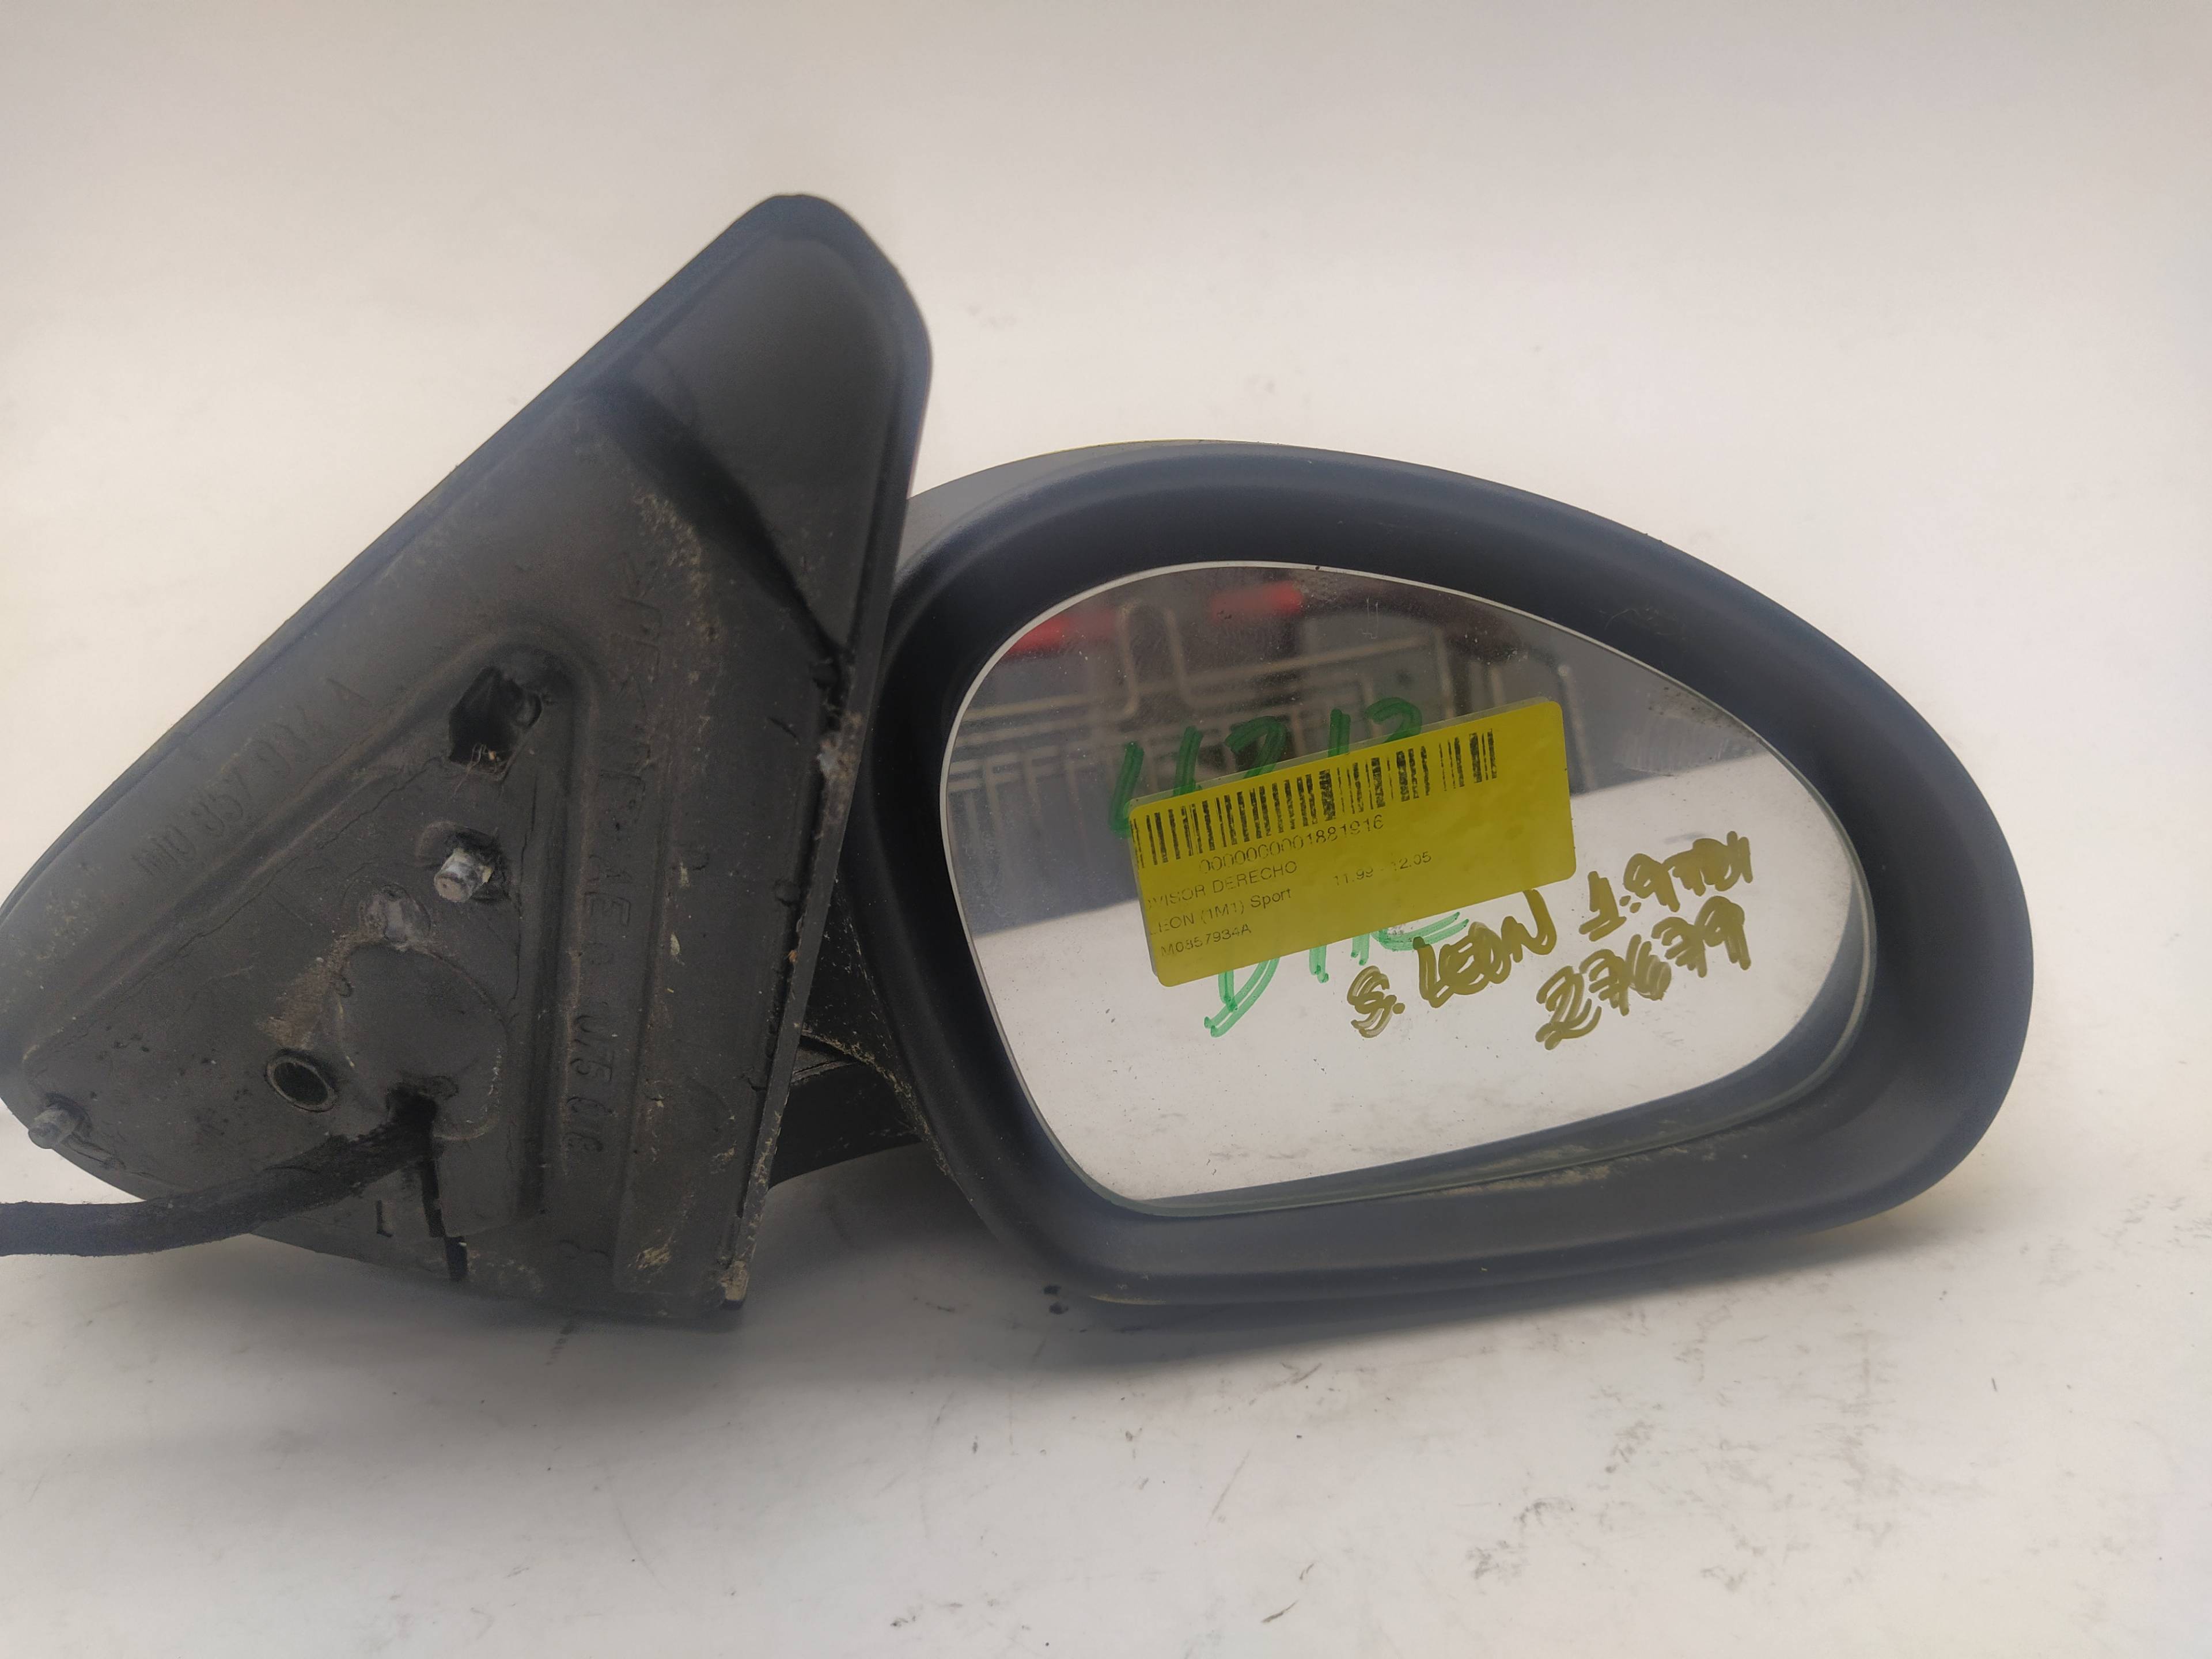 SEAT Leon 1 generation (1999-2005) Right Side Wing Mirror 1M0857934A 18551903